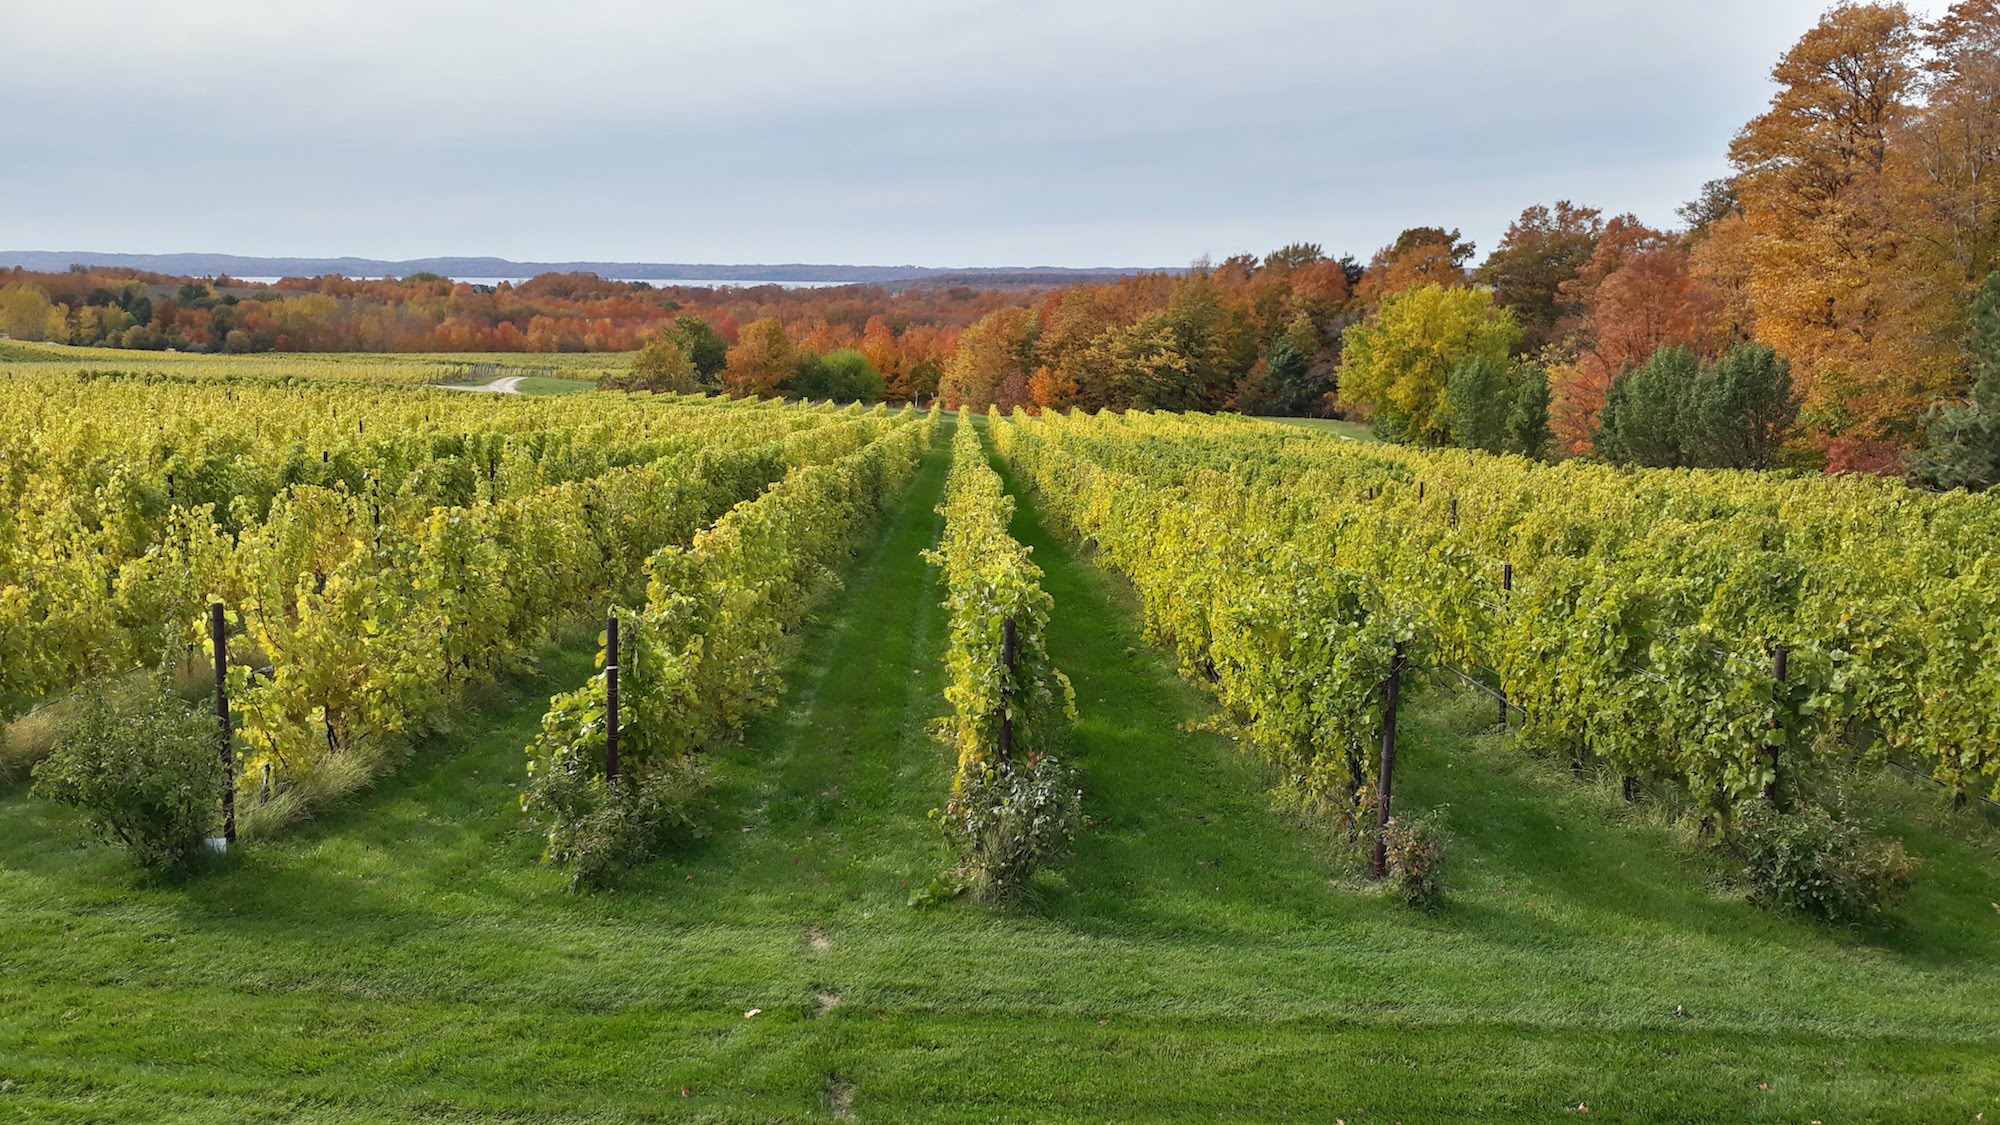 A photo of rows of green grape vines in the foreground. In the background, there are trees with fall foliage